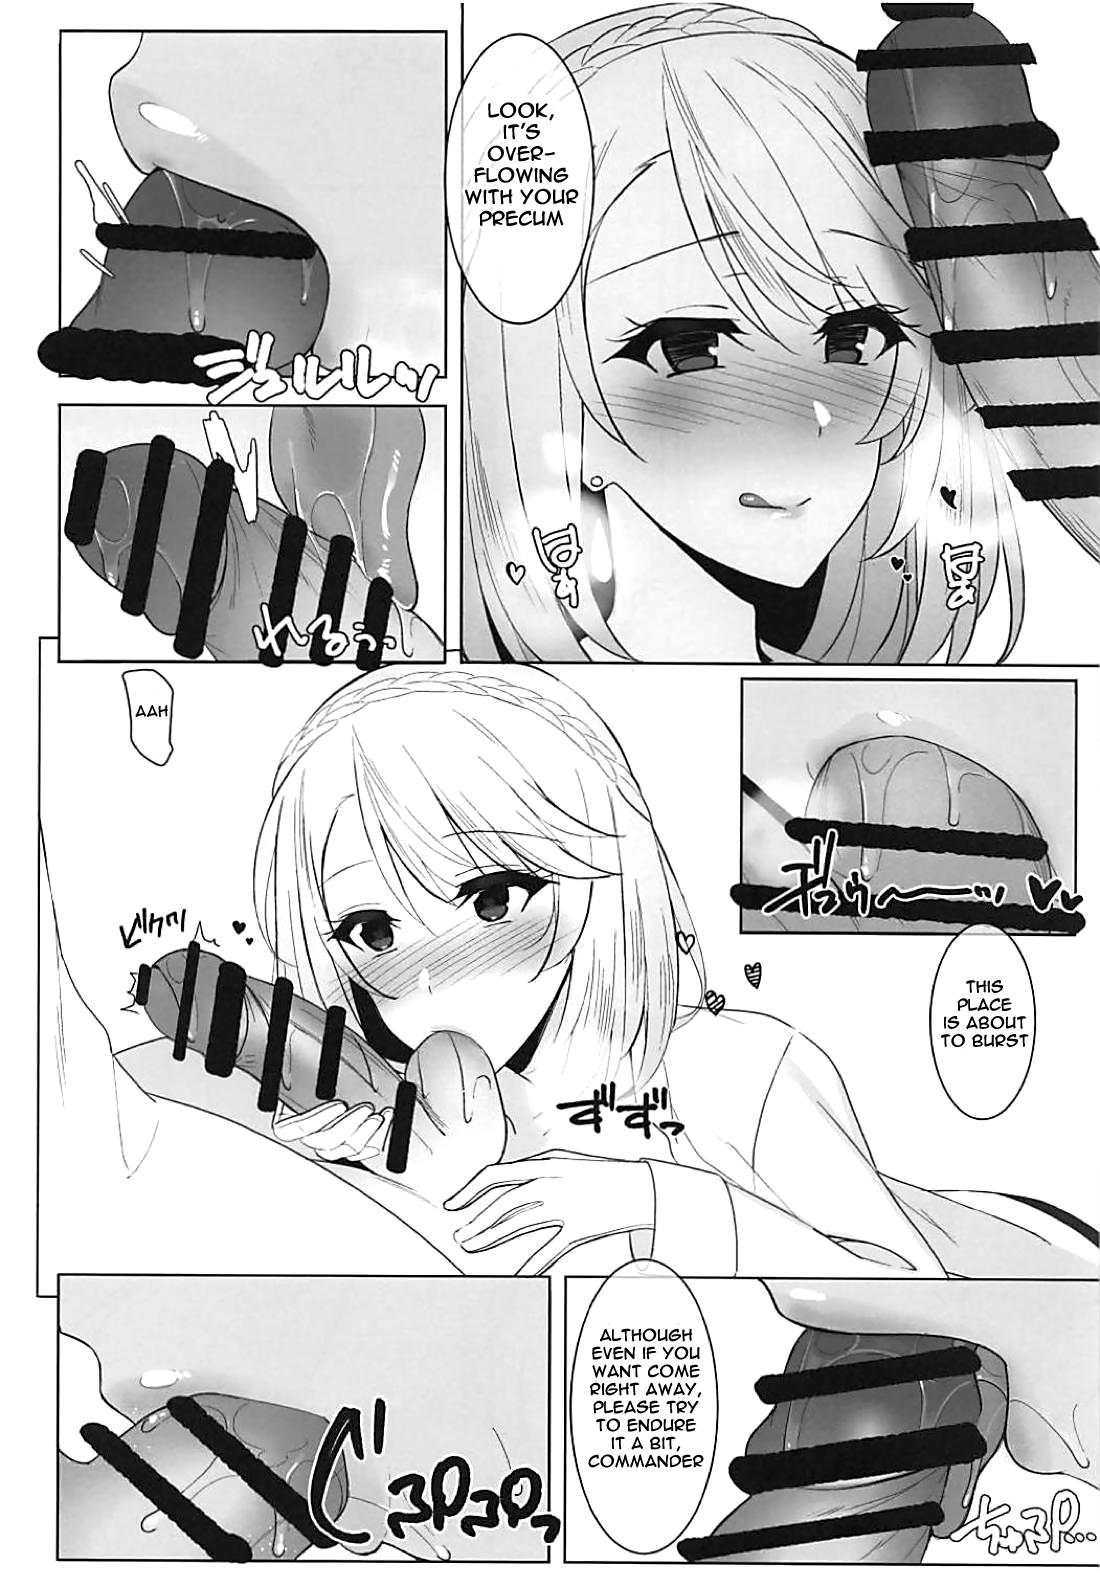 Sexy Sluts Wales to! | With Wales! - Azur lane Panties - Page 8